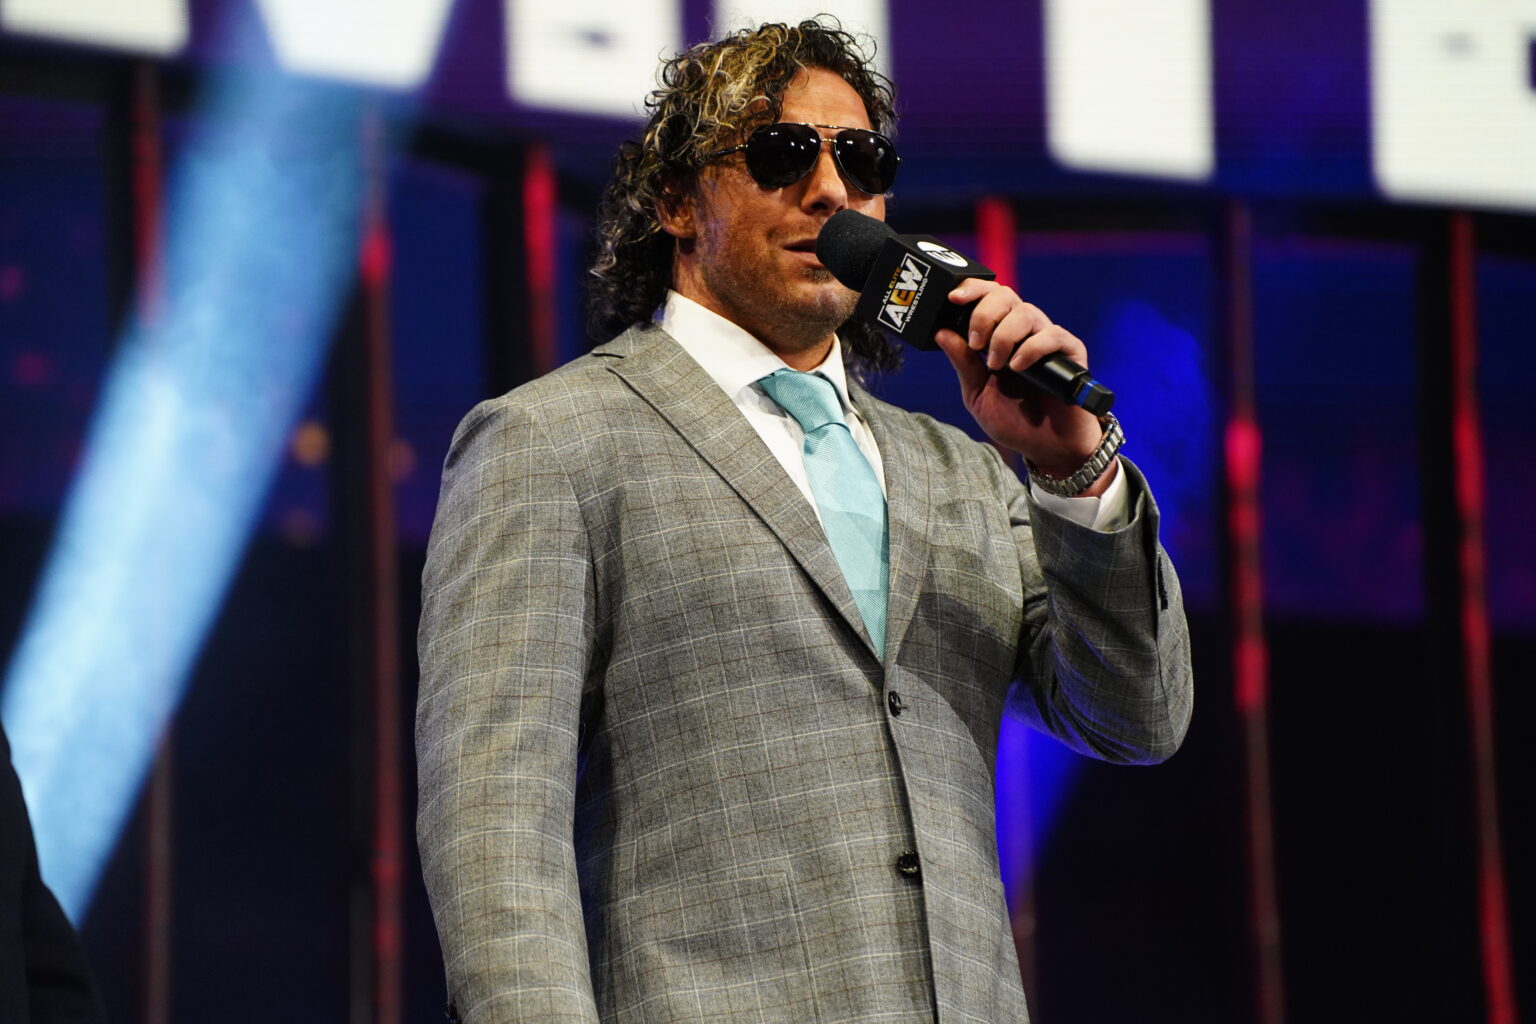 Kenny Omega Says He Is Still Feeling The Effects Of The WK17 And Escalera De La Muerte Matches